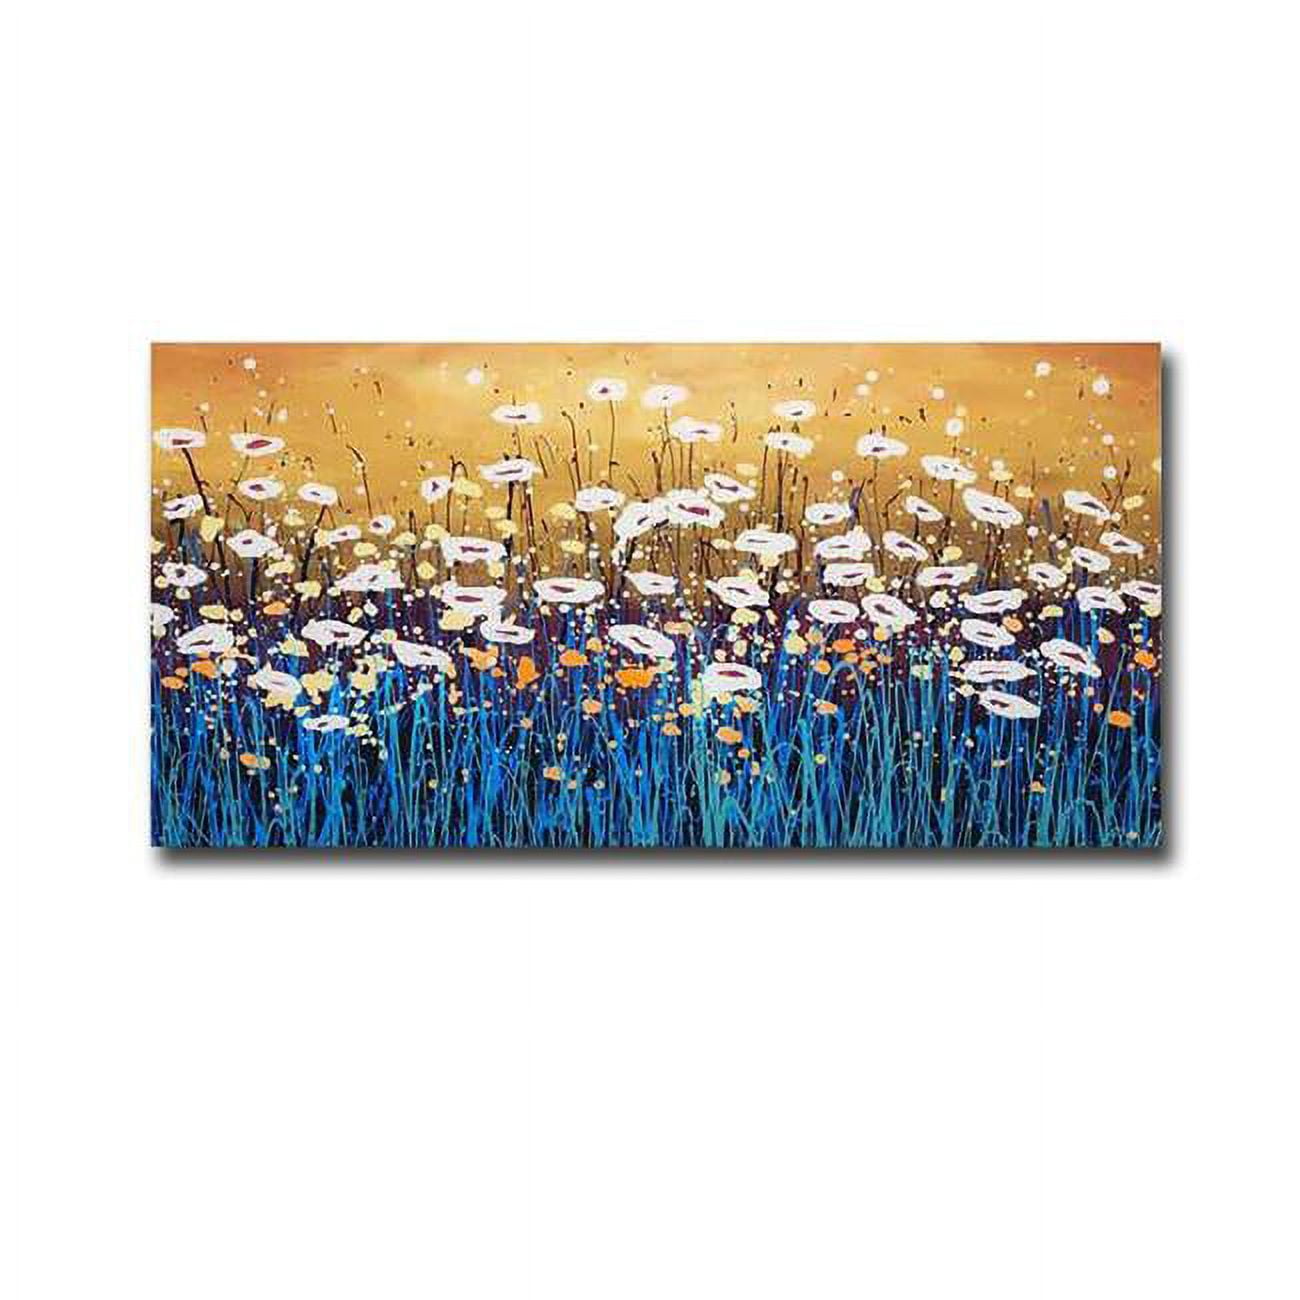 1632586eg Peace Flower By Daniel Lager Premium Gallery-wrapped Canvas Giclee Art - 16 X 32 In.